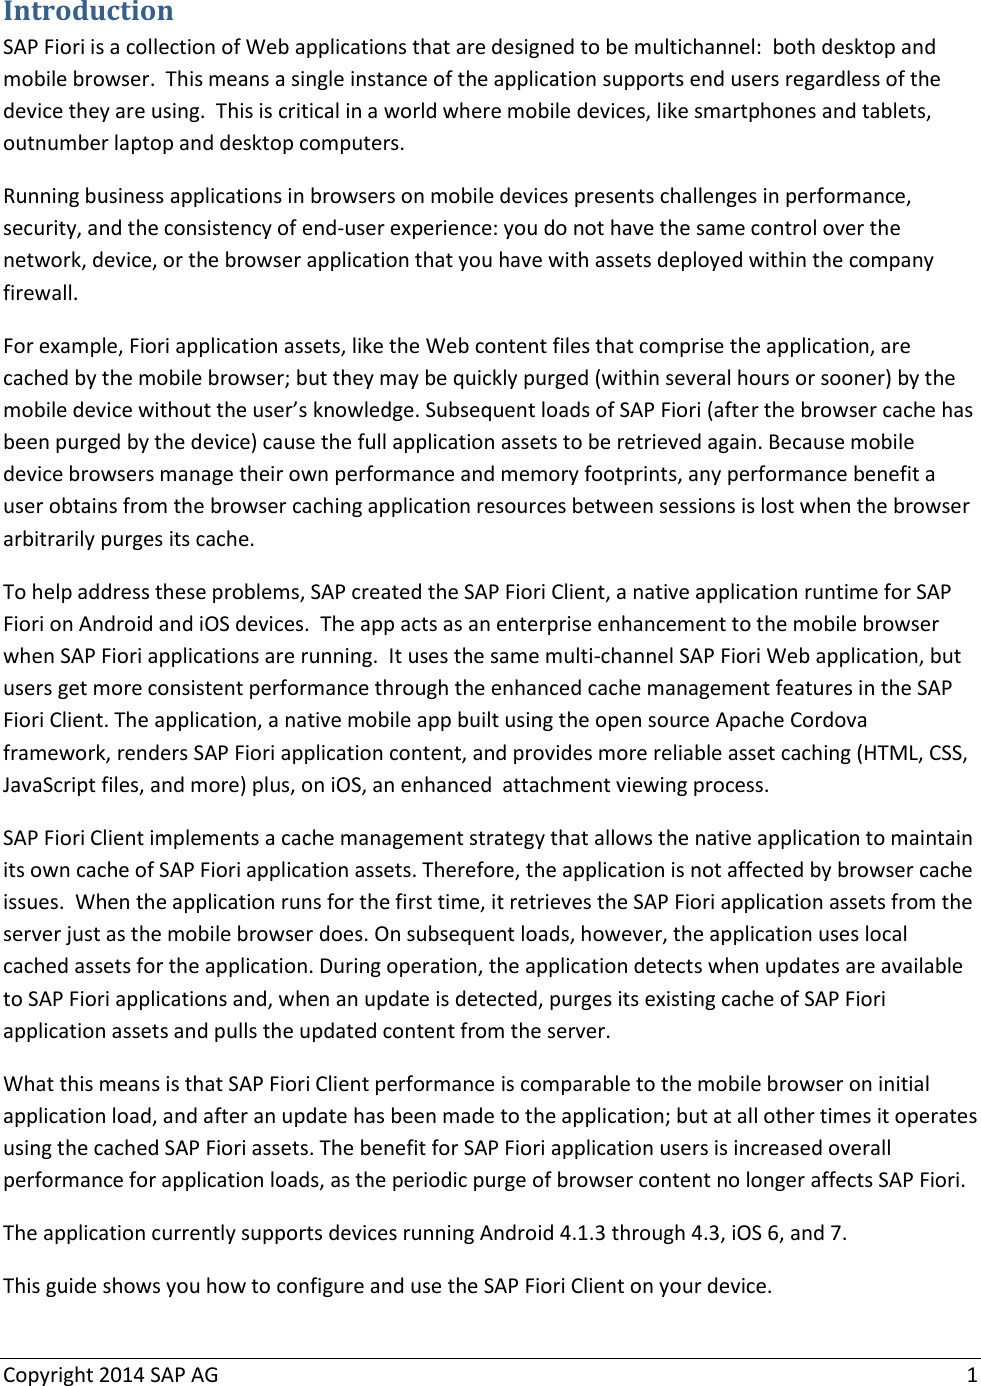 Page 2 of 12 - SAP Fiori Client User Guide